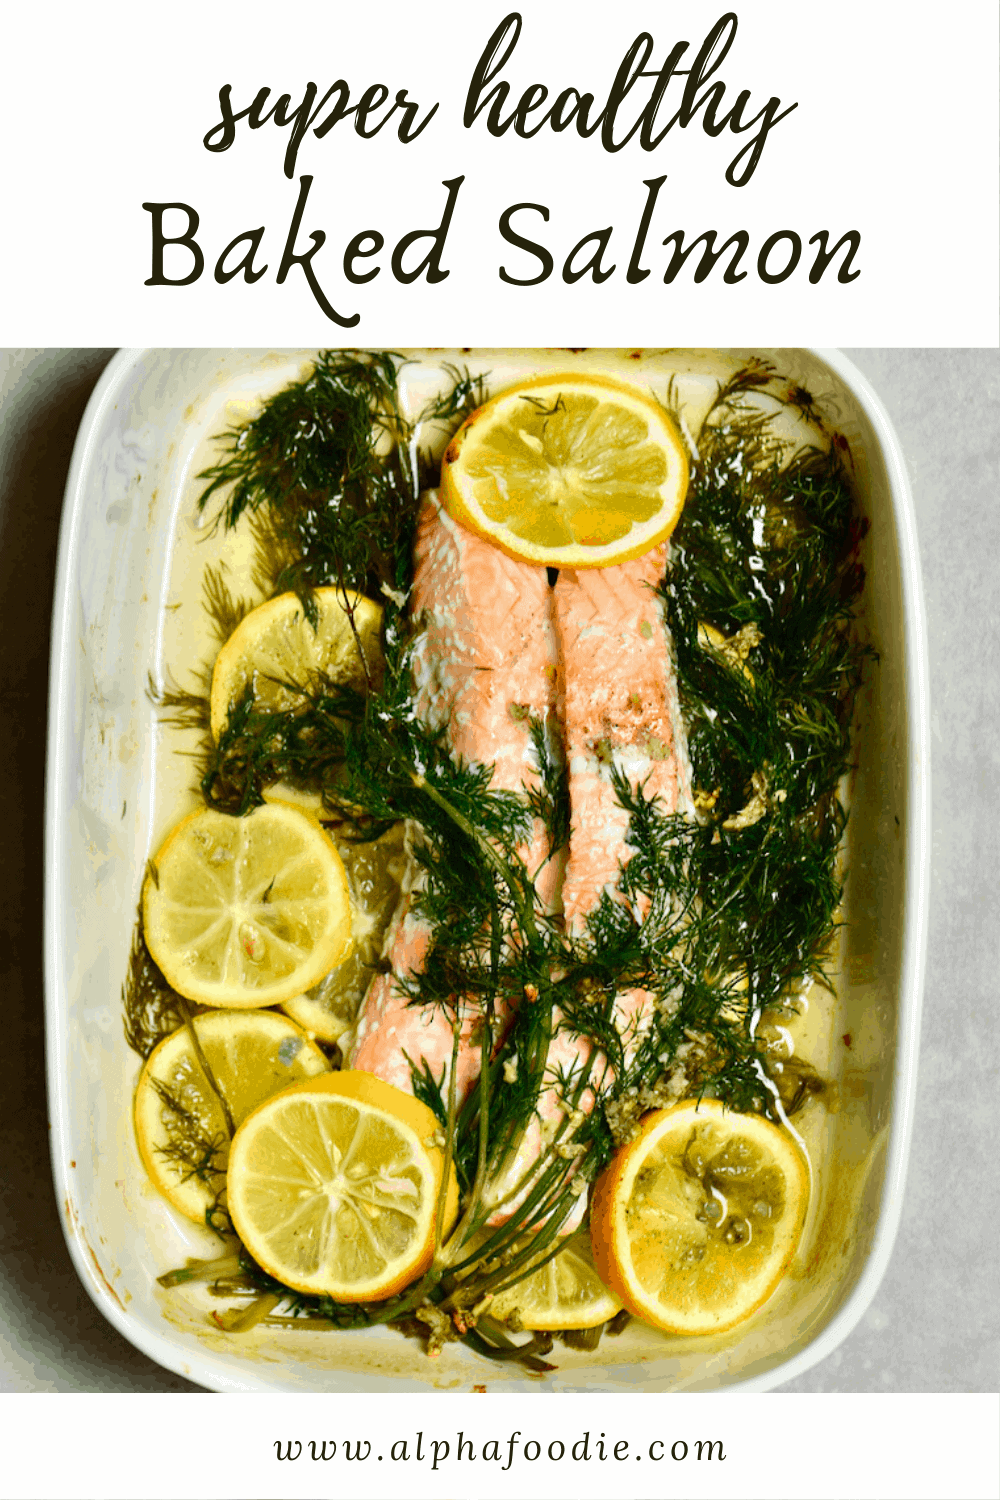 Lemon & Dill Oven Baked Salmon (Immune Boosting) - Alphafoodie